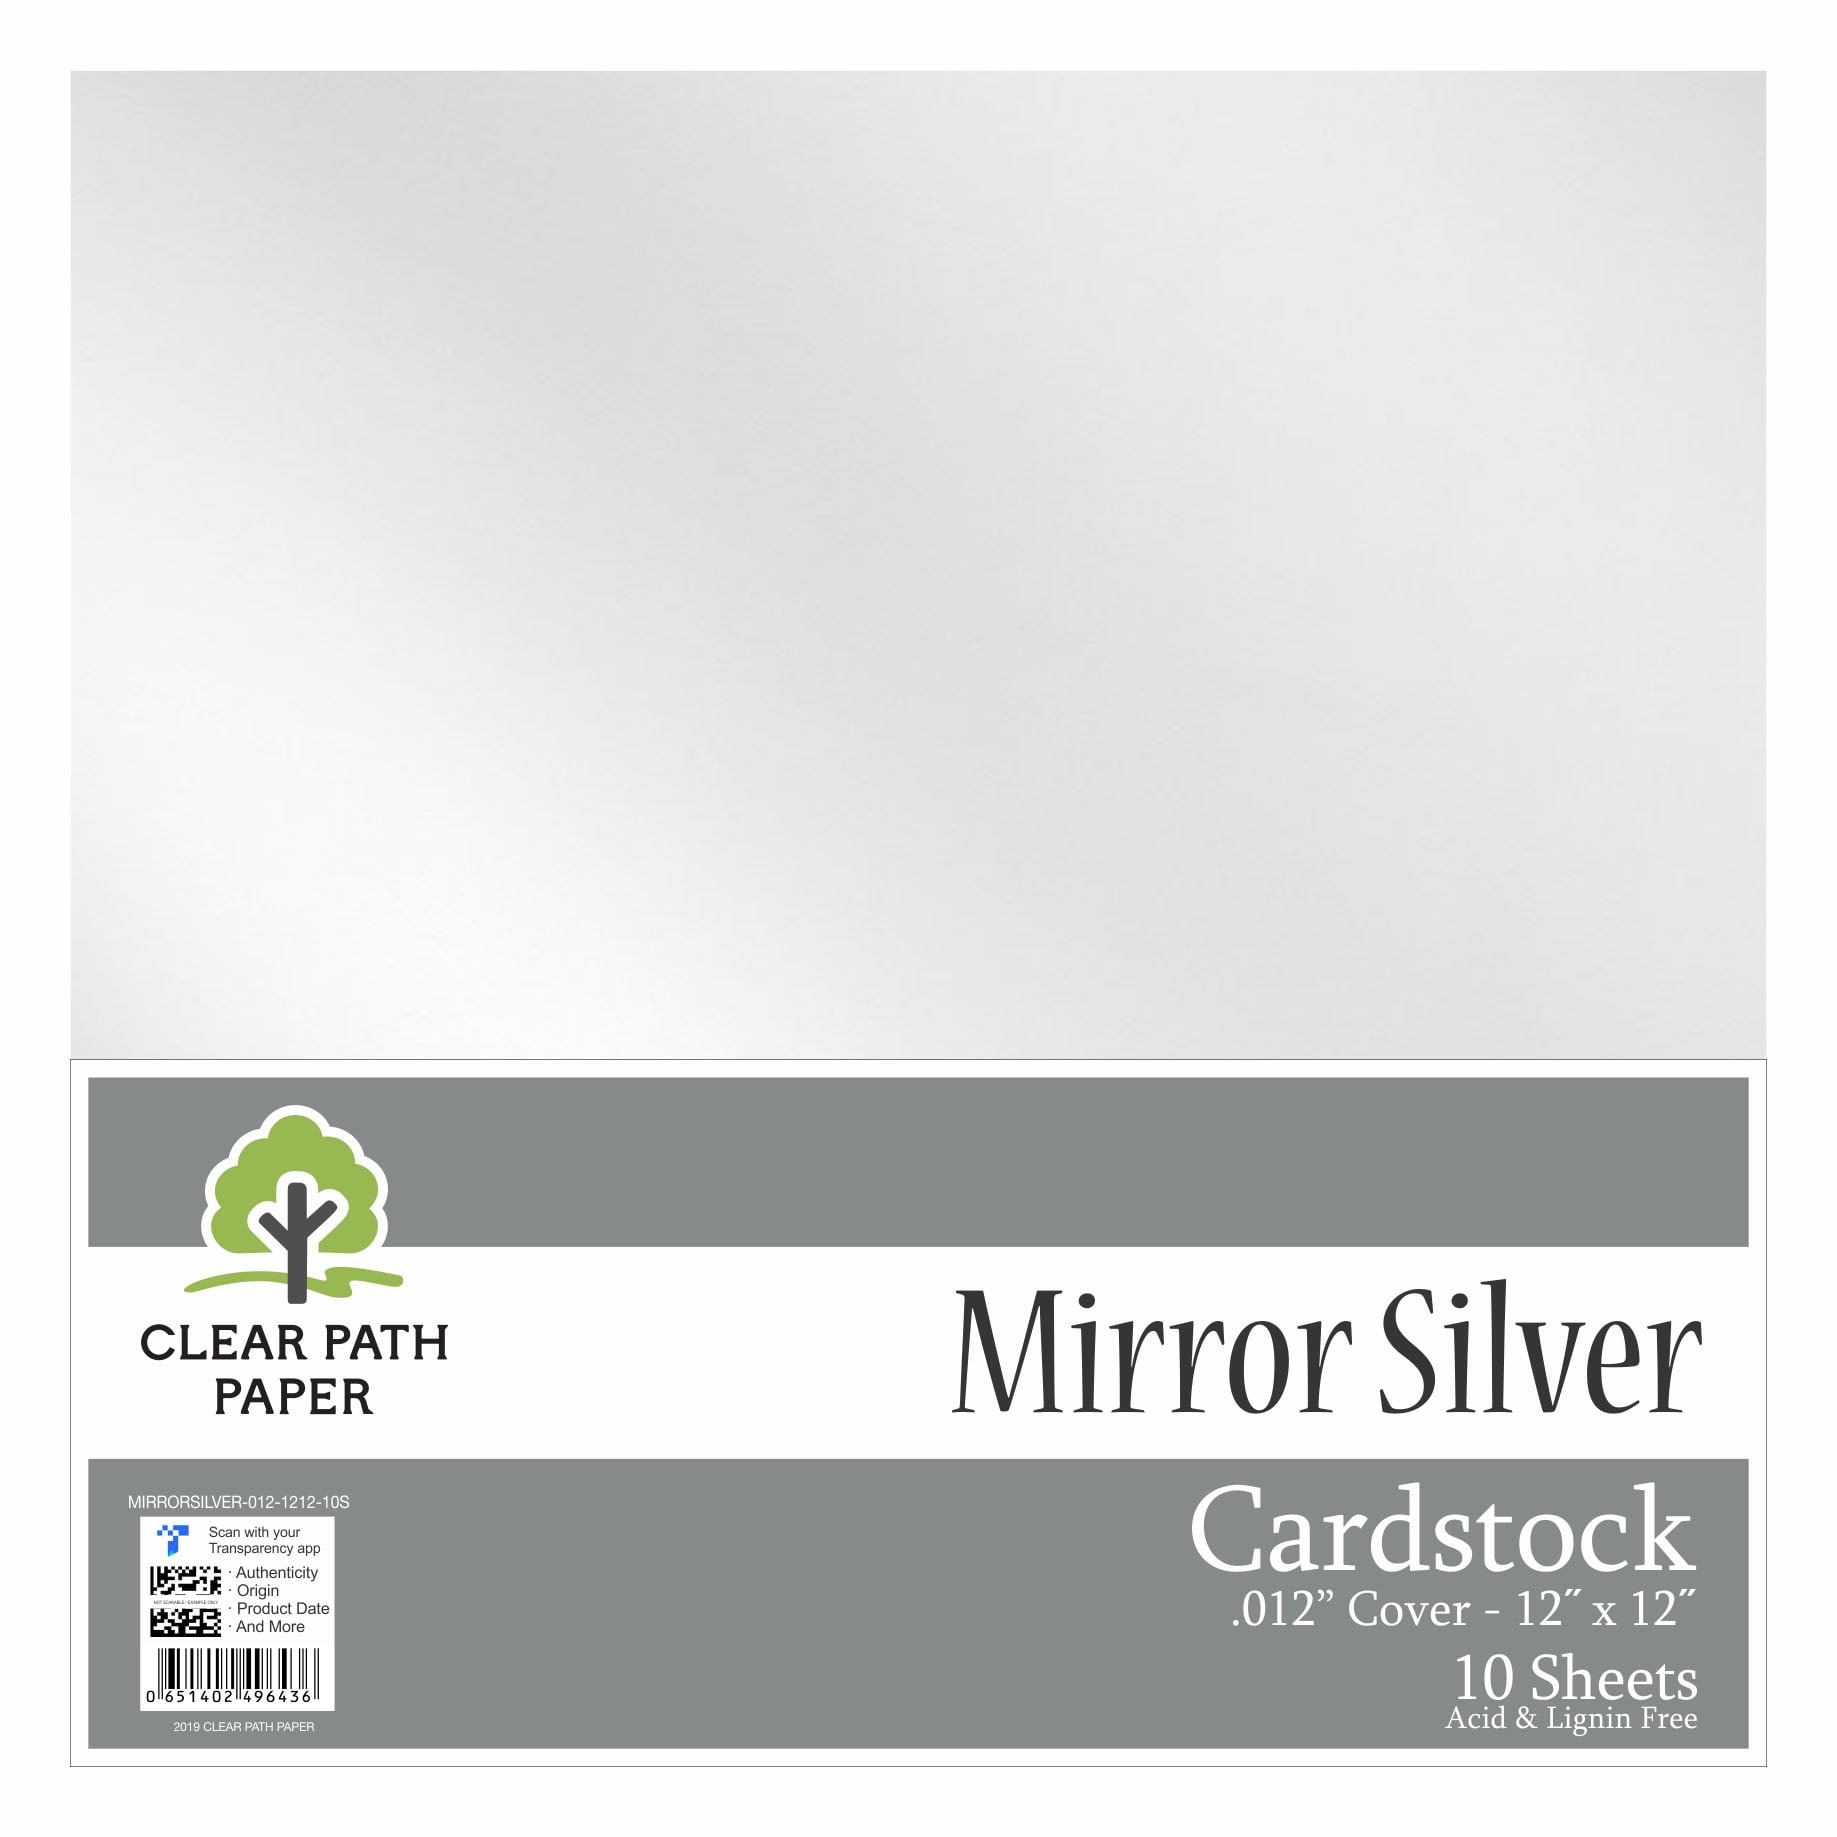 Pearlescent Champagne White Cardstock - 12 x 12 inch - 105Lb Cover - 20  Sheets - Clear Path Paper